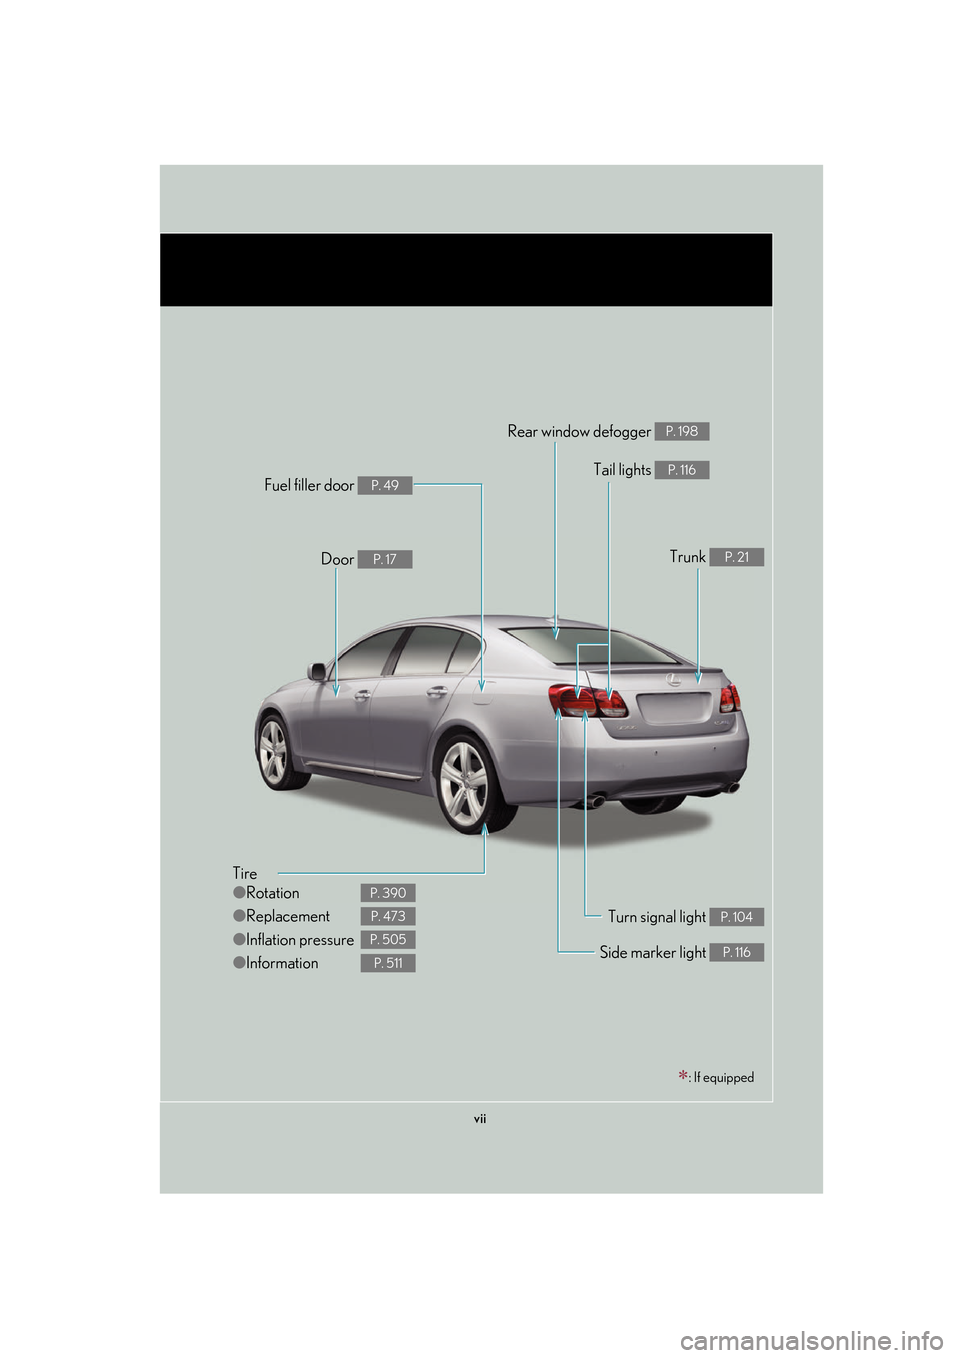 Lexus GS350 2007  Using the hands-free system / LEXUS 2007 GS430/350 OWNERS MANUAL (OM30A04U) vii
Tire
●Rotation
● Replacement
● Inflation pressure
● Information
P. 390
P. 473
P. 505
P. 511
Tail lights P. 116
Side marker light P. 116
Trunk P. 21
Rear window defogger P. 198
Door P. 17
F